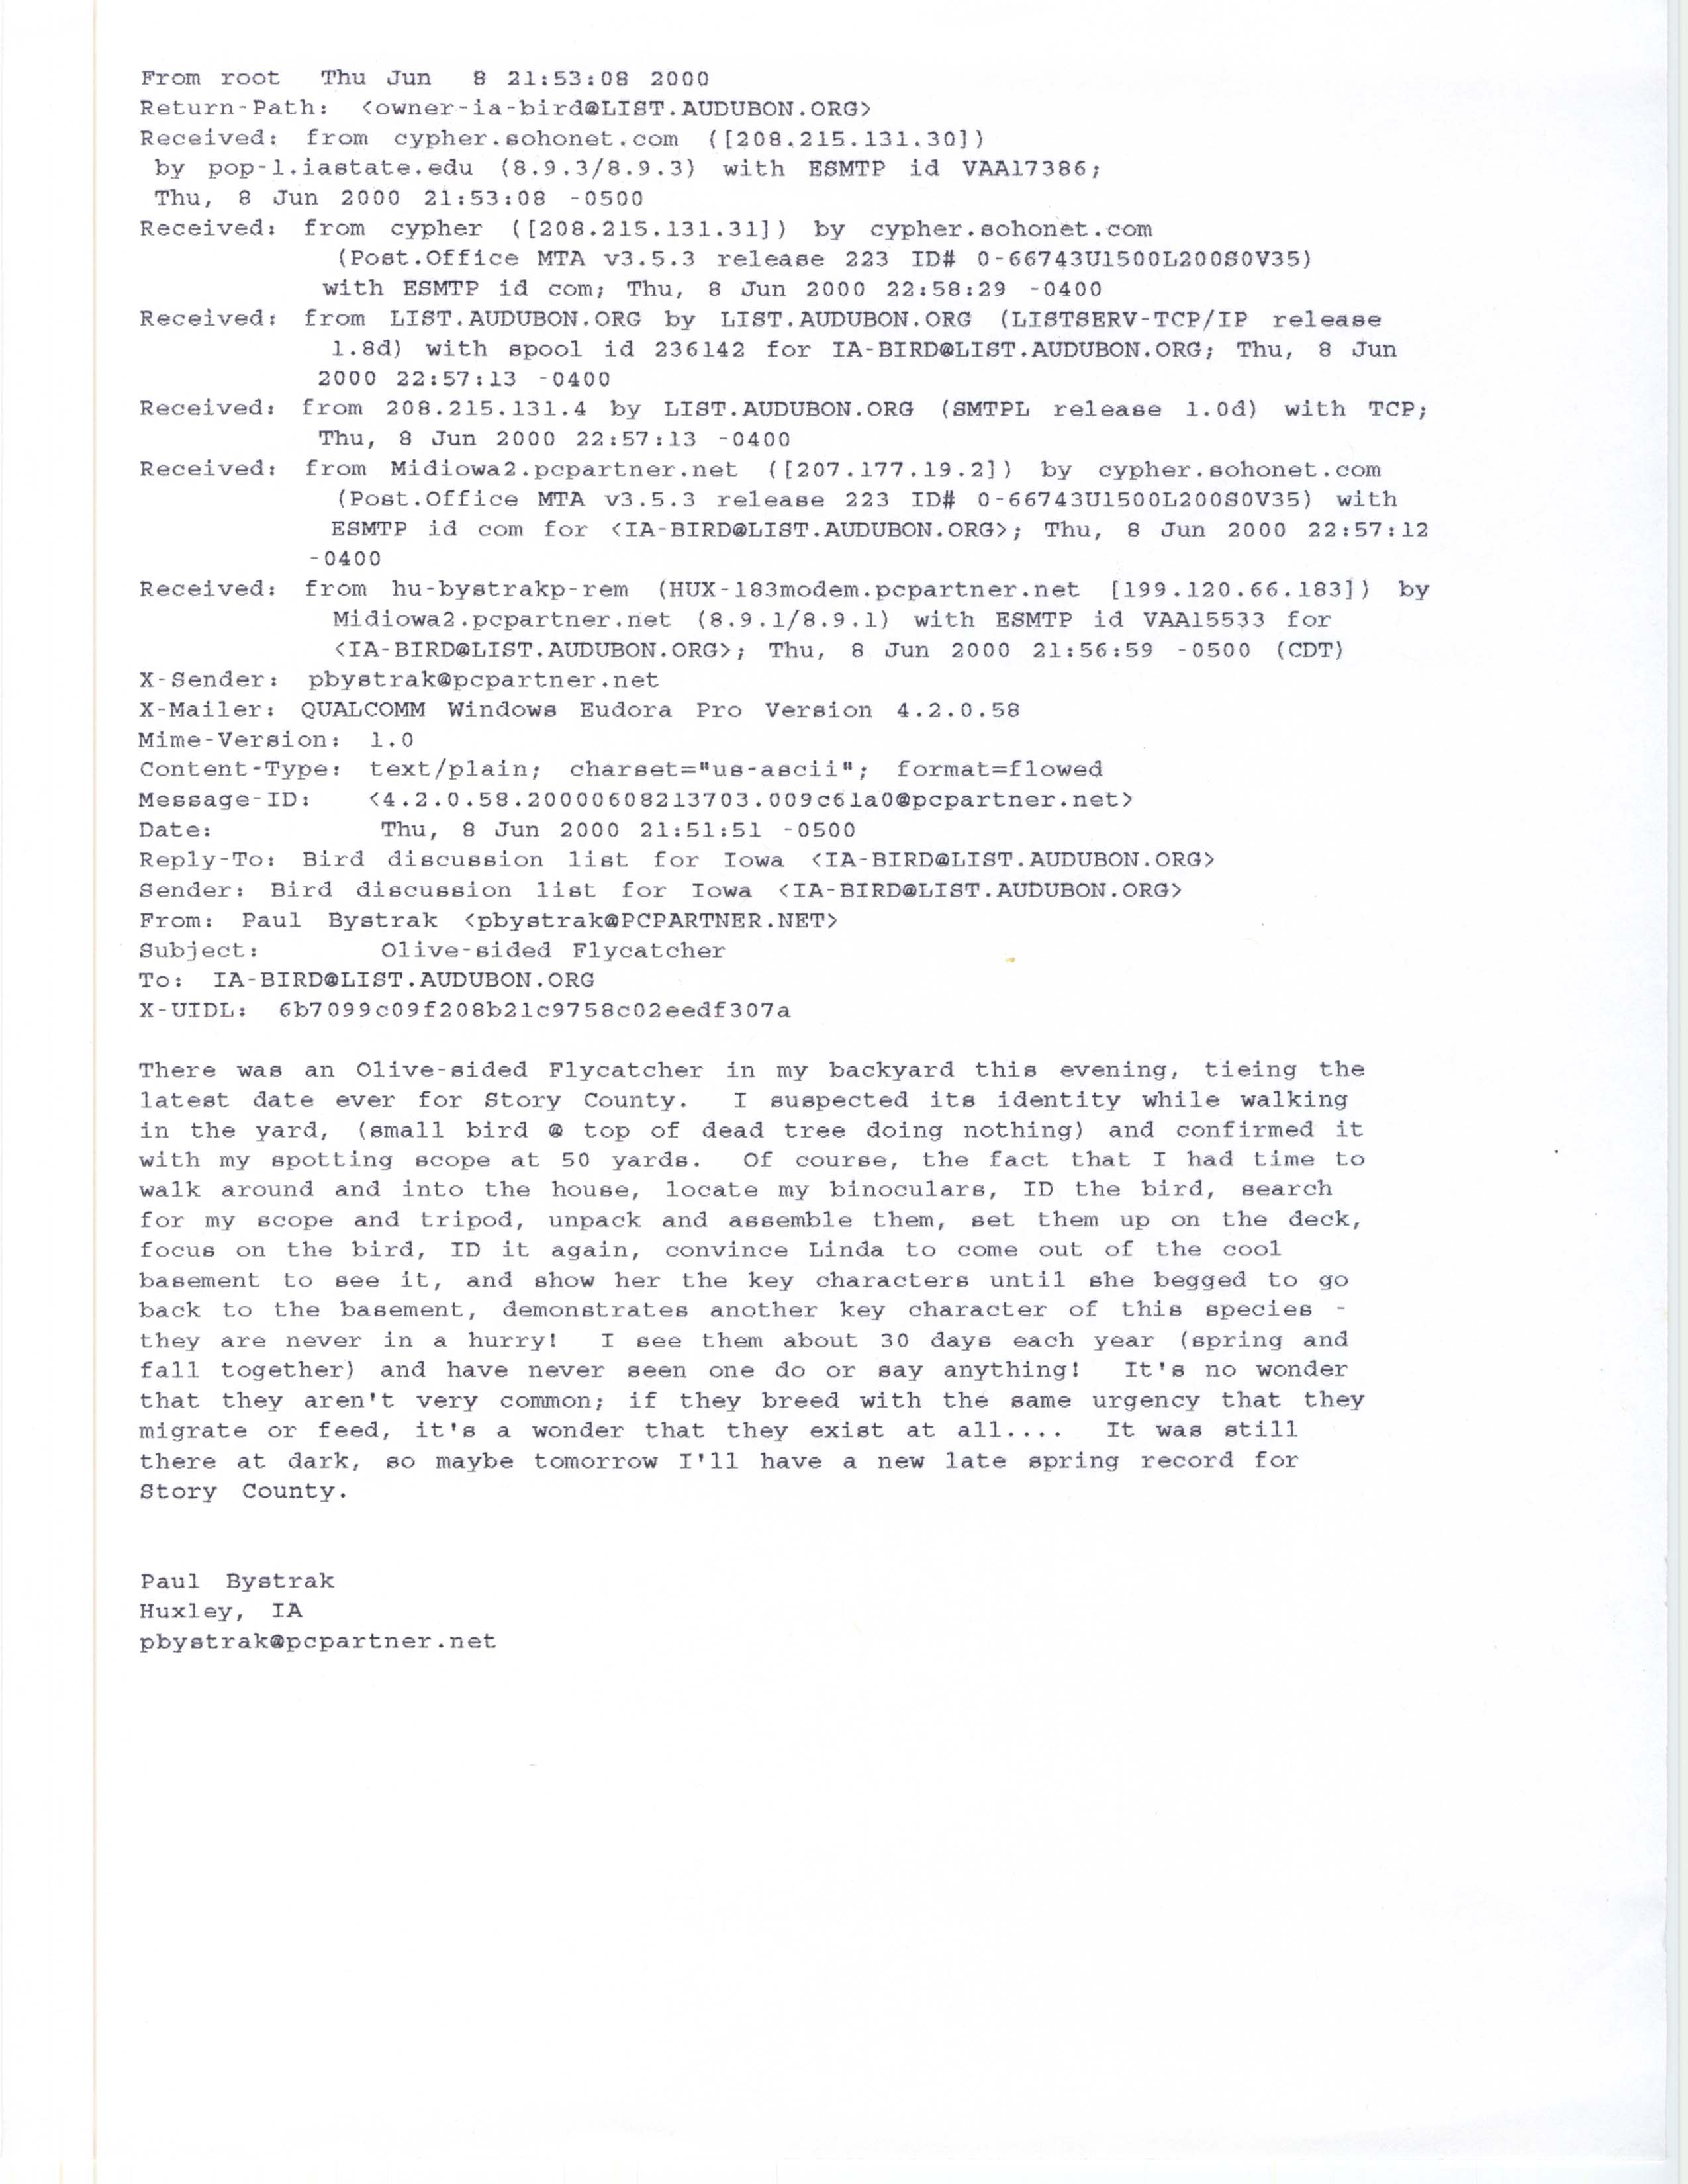 Paul G. Bystrak email to the IA-BIRD mailing list regarding an Olive-sided Flycatcher sighting, June 8, 2000